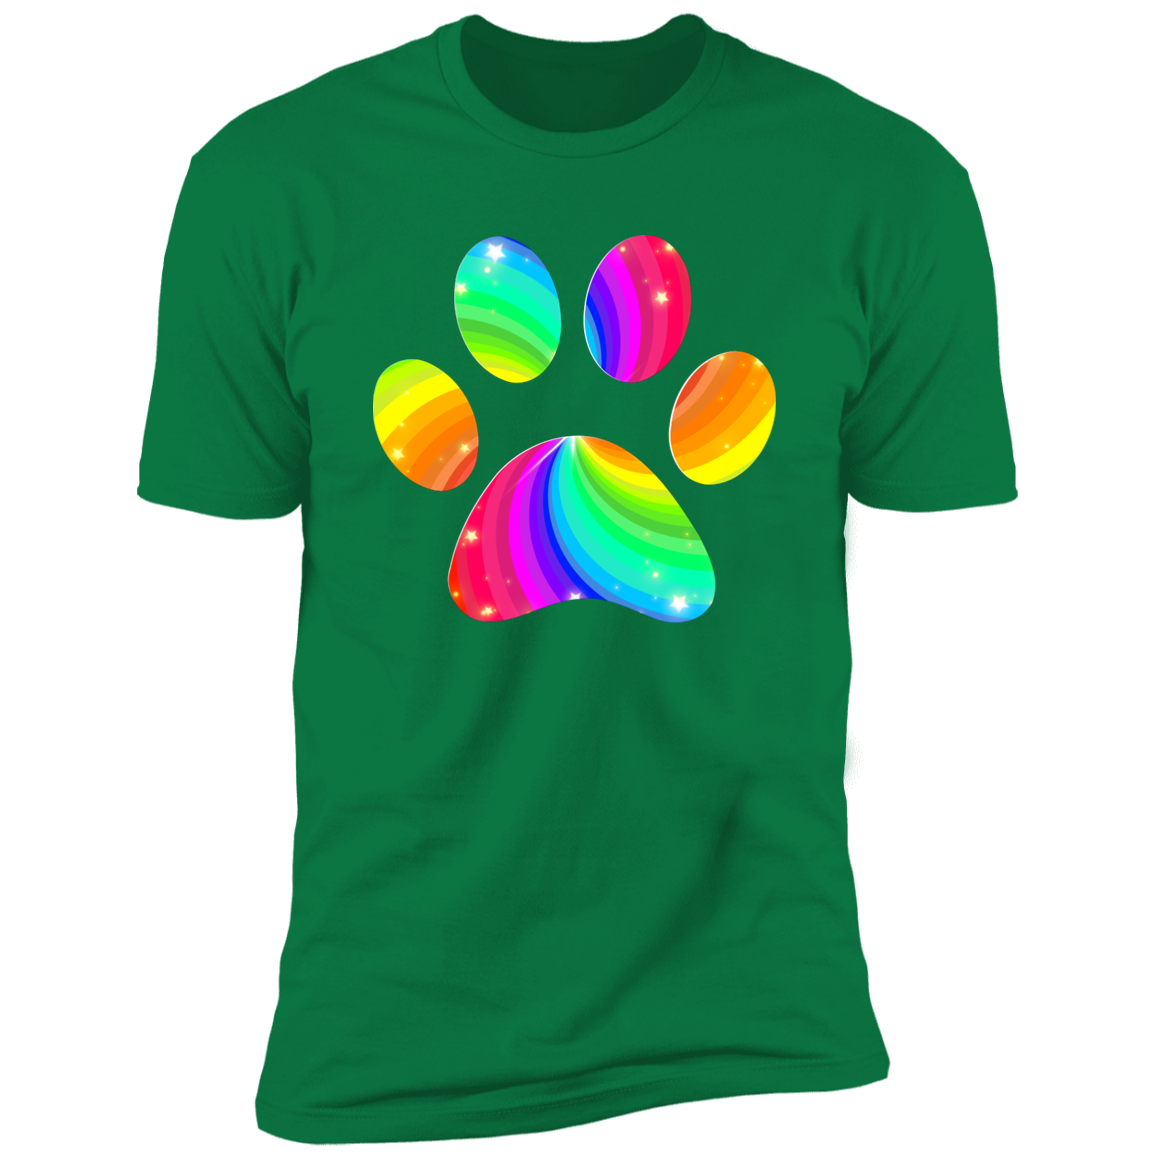 Pride Paw 2023 (Flag) Pride T-shirt, Paw Pride Dog Shirt for humans, in kelly green